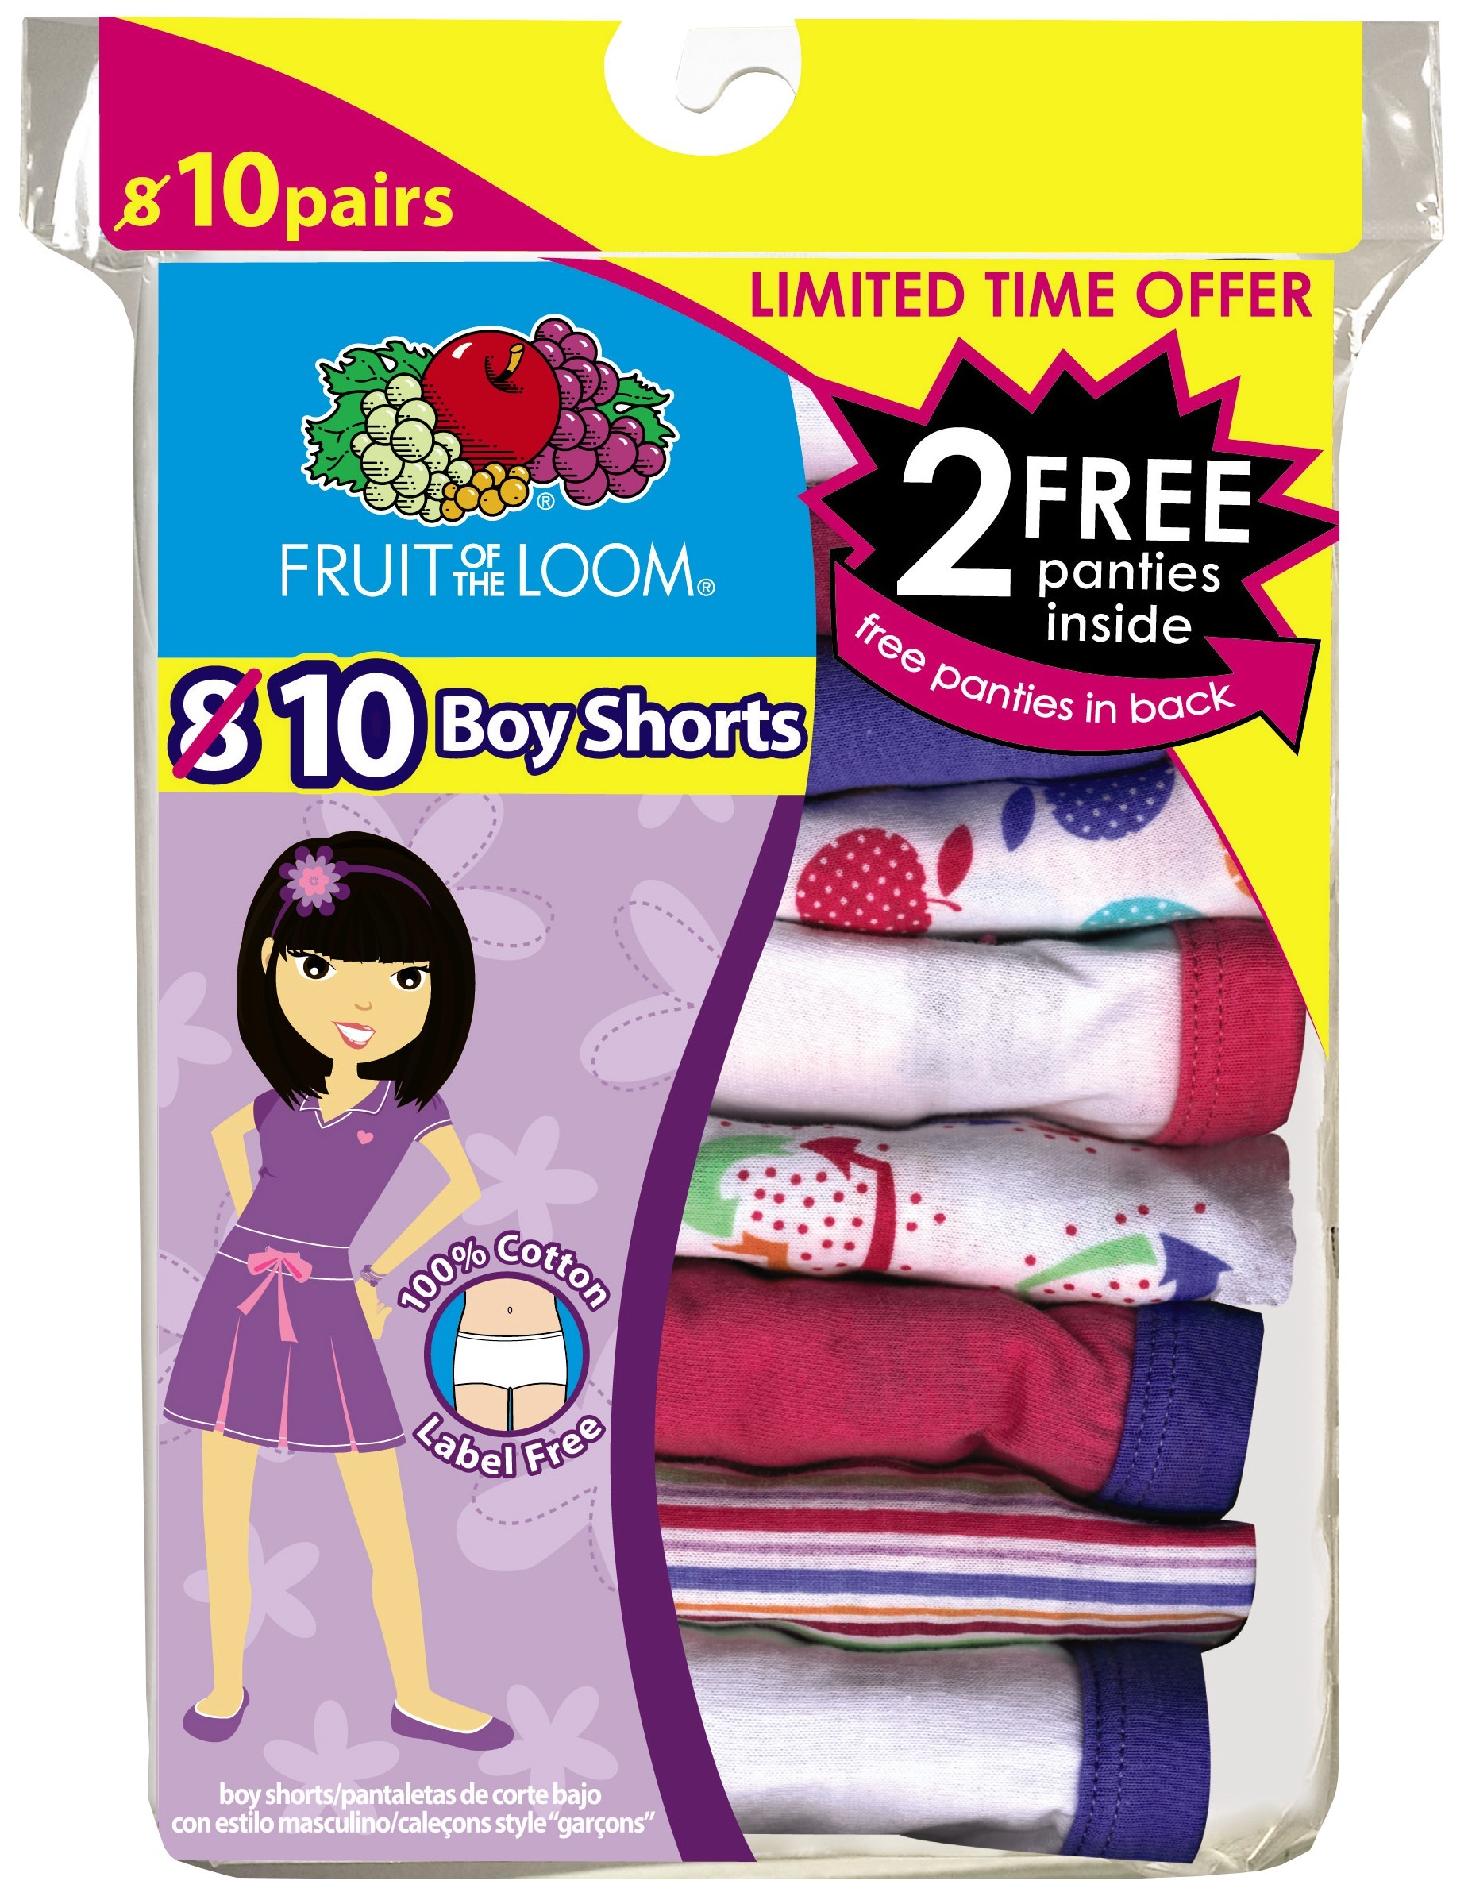 Fruit of the Loom Girl's 11-Pack Boy Shorts - Assorted Prints & Solids